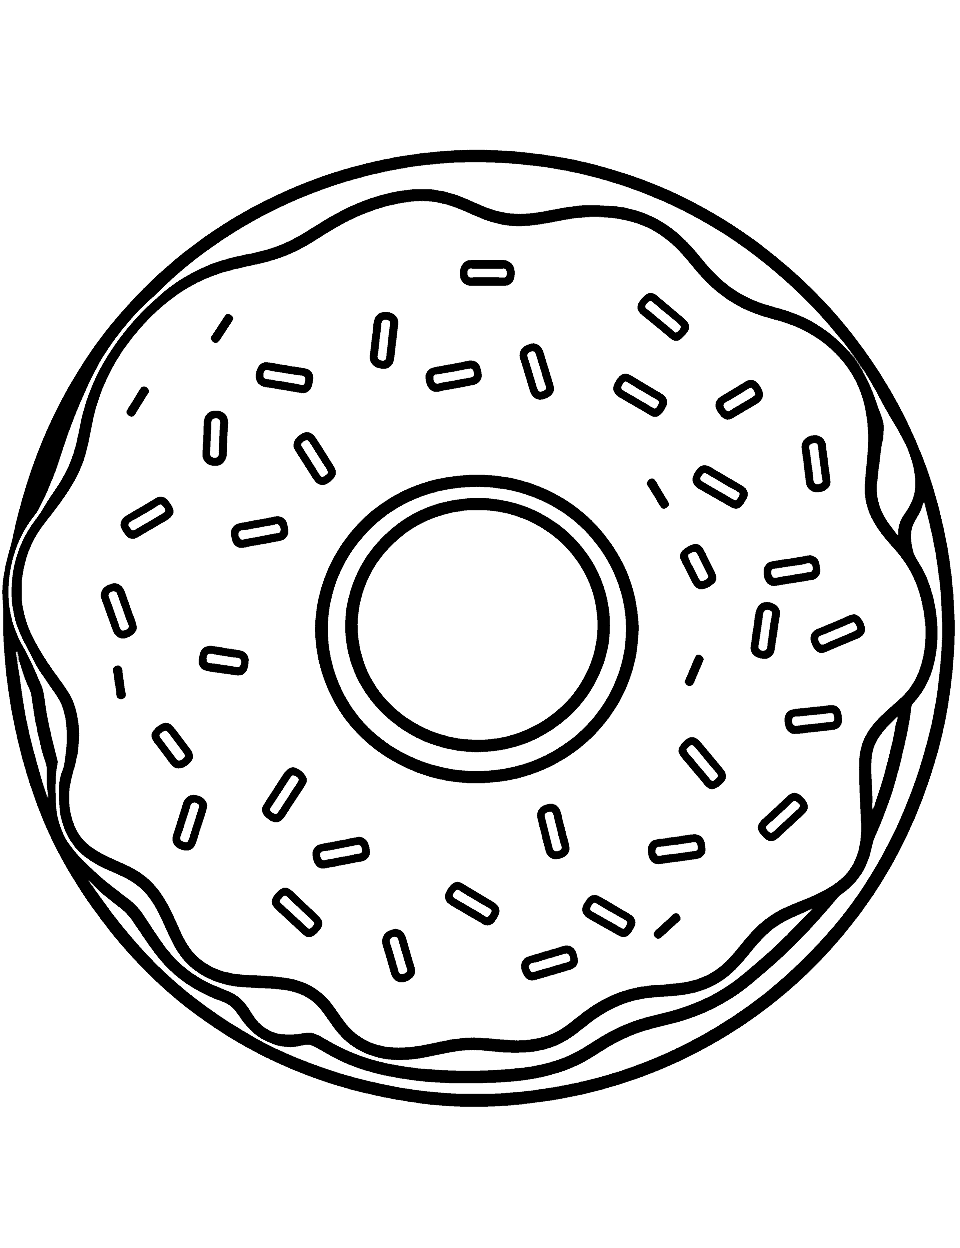 Kawaii Donut With Sprinkles Cute Coloring Page - A donut with a smiling face and colorful sprinkles.